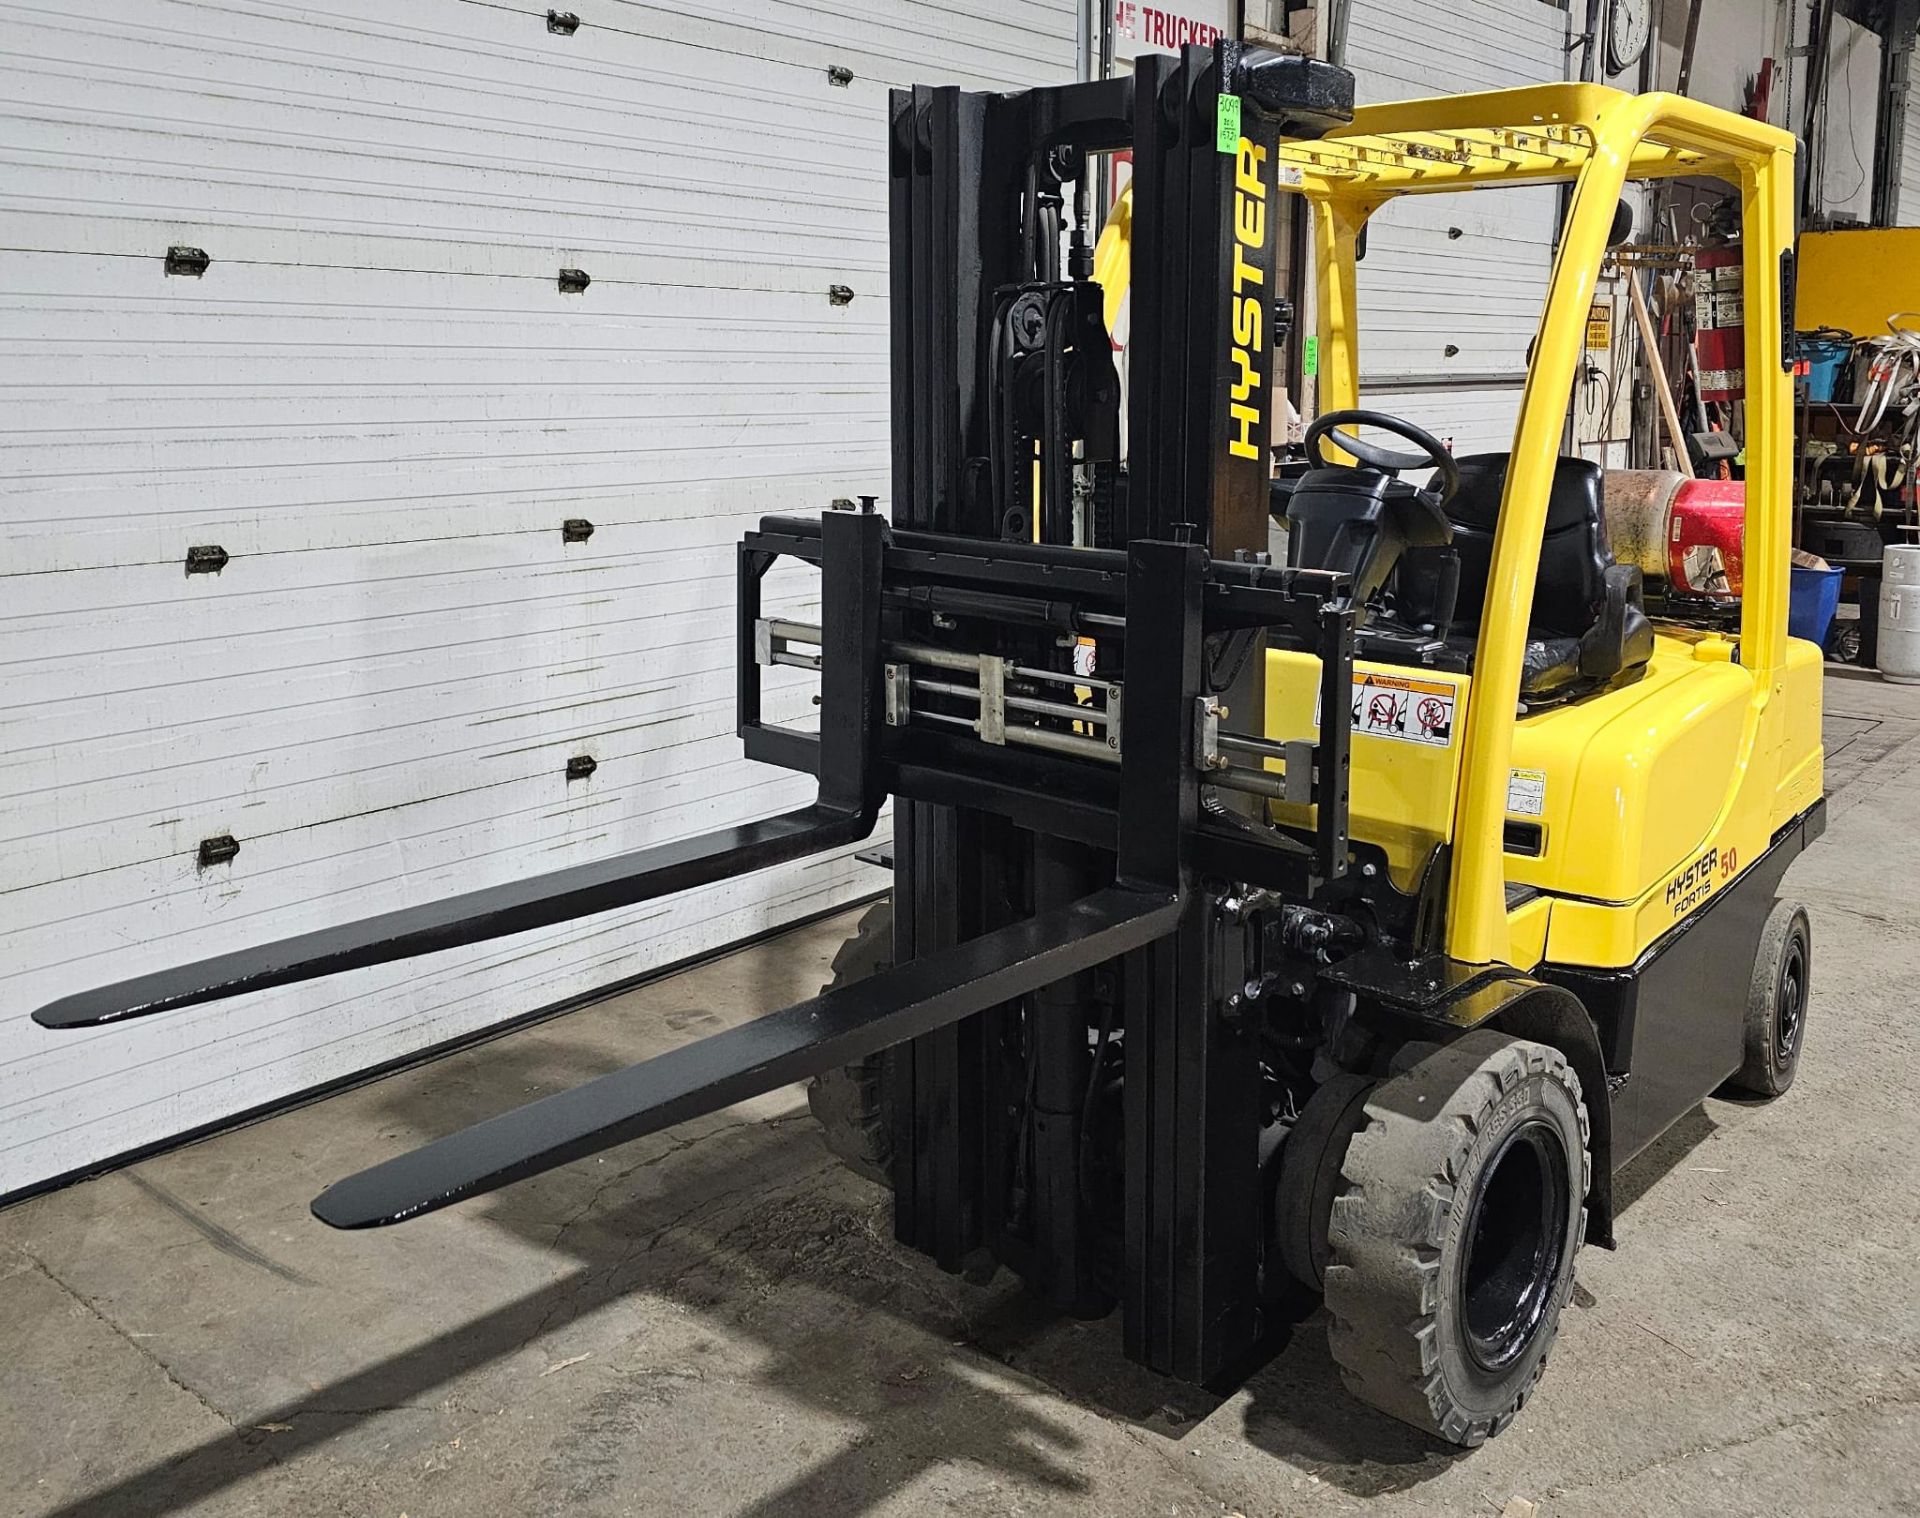 2010 Hyster 5,000lbs Capacity LPG (Propane) OUTDOOR Forklift sideshift positioner 3-STAGE MAST 189" - Image 4 of 5